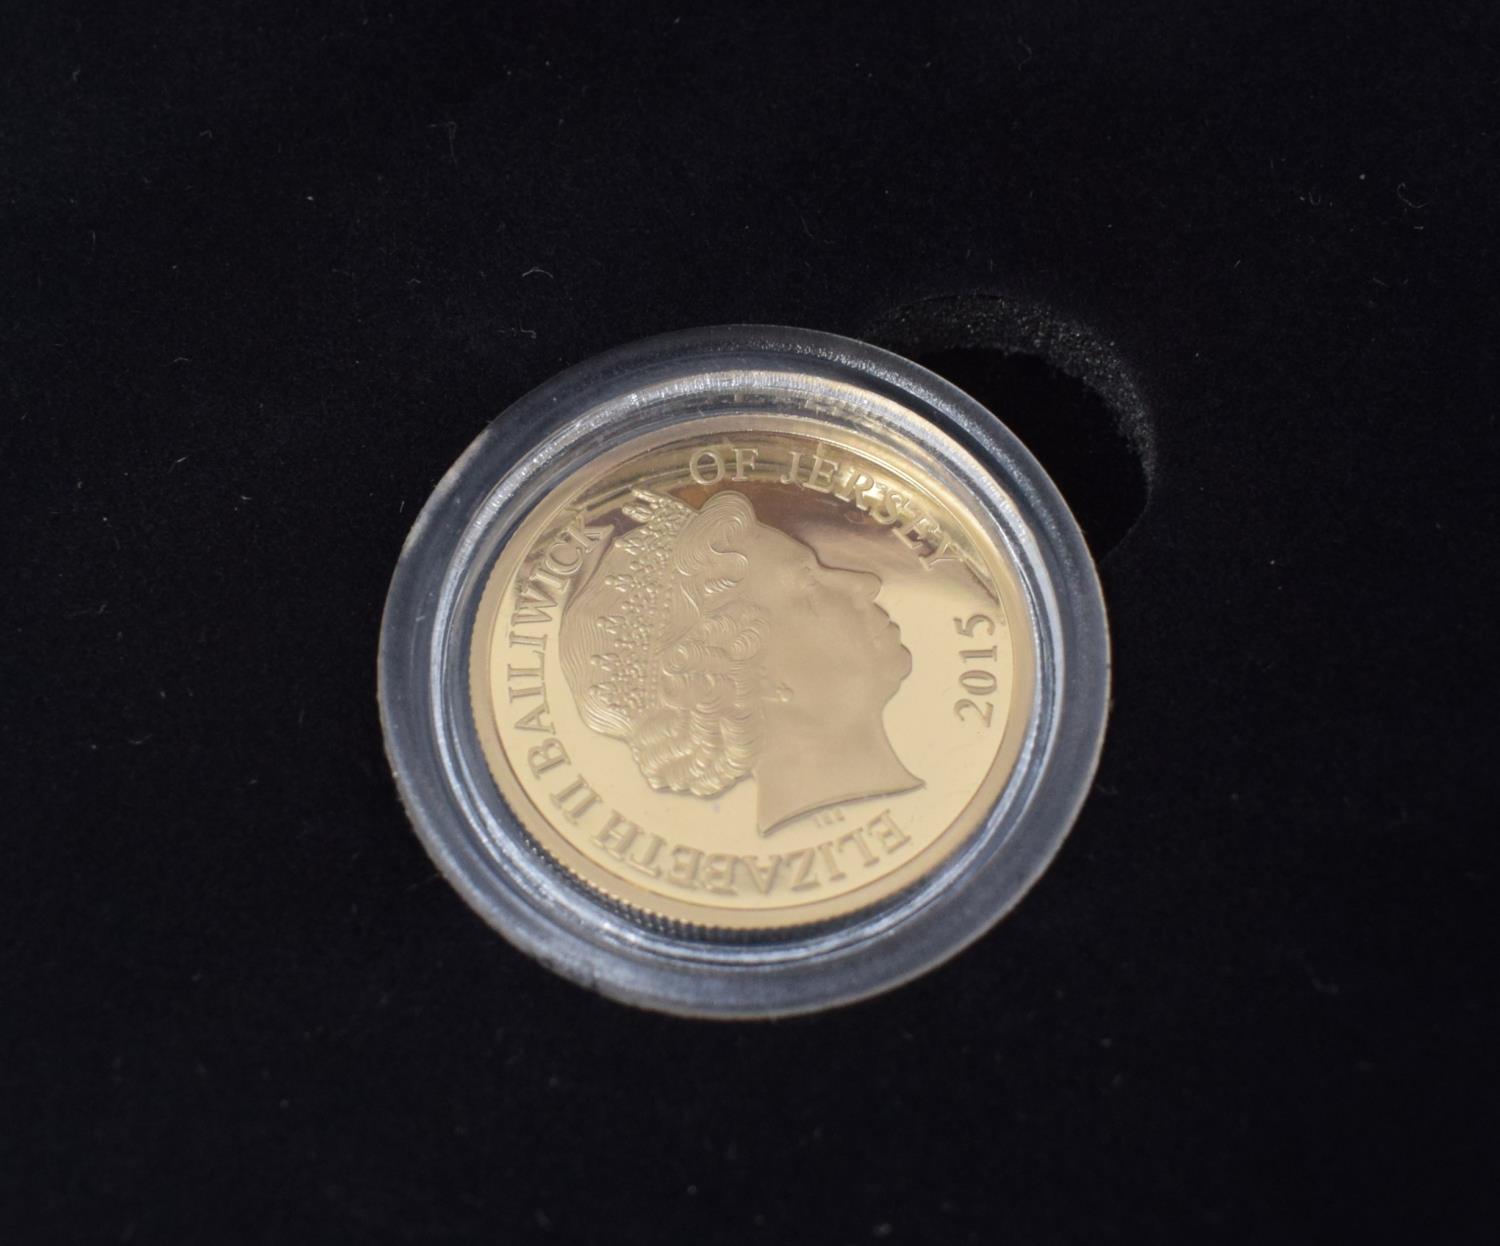 A Longest Reigning Monarch gold £1 proof coin, boxed with certificate - Image 2 of 2